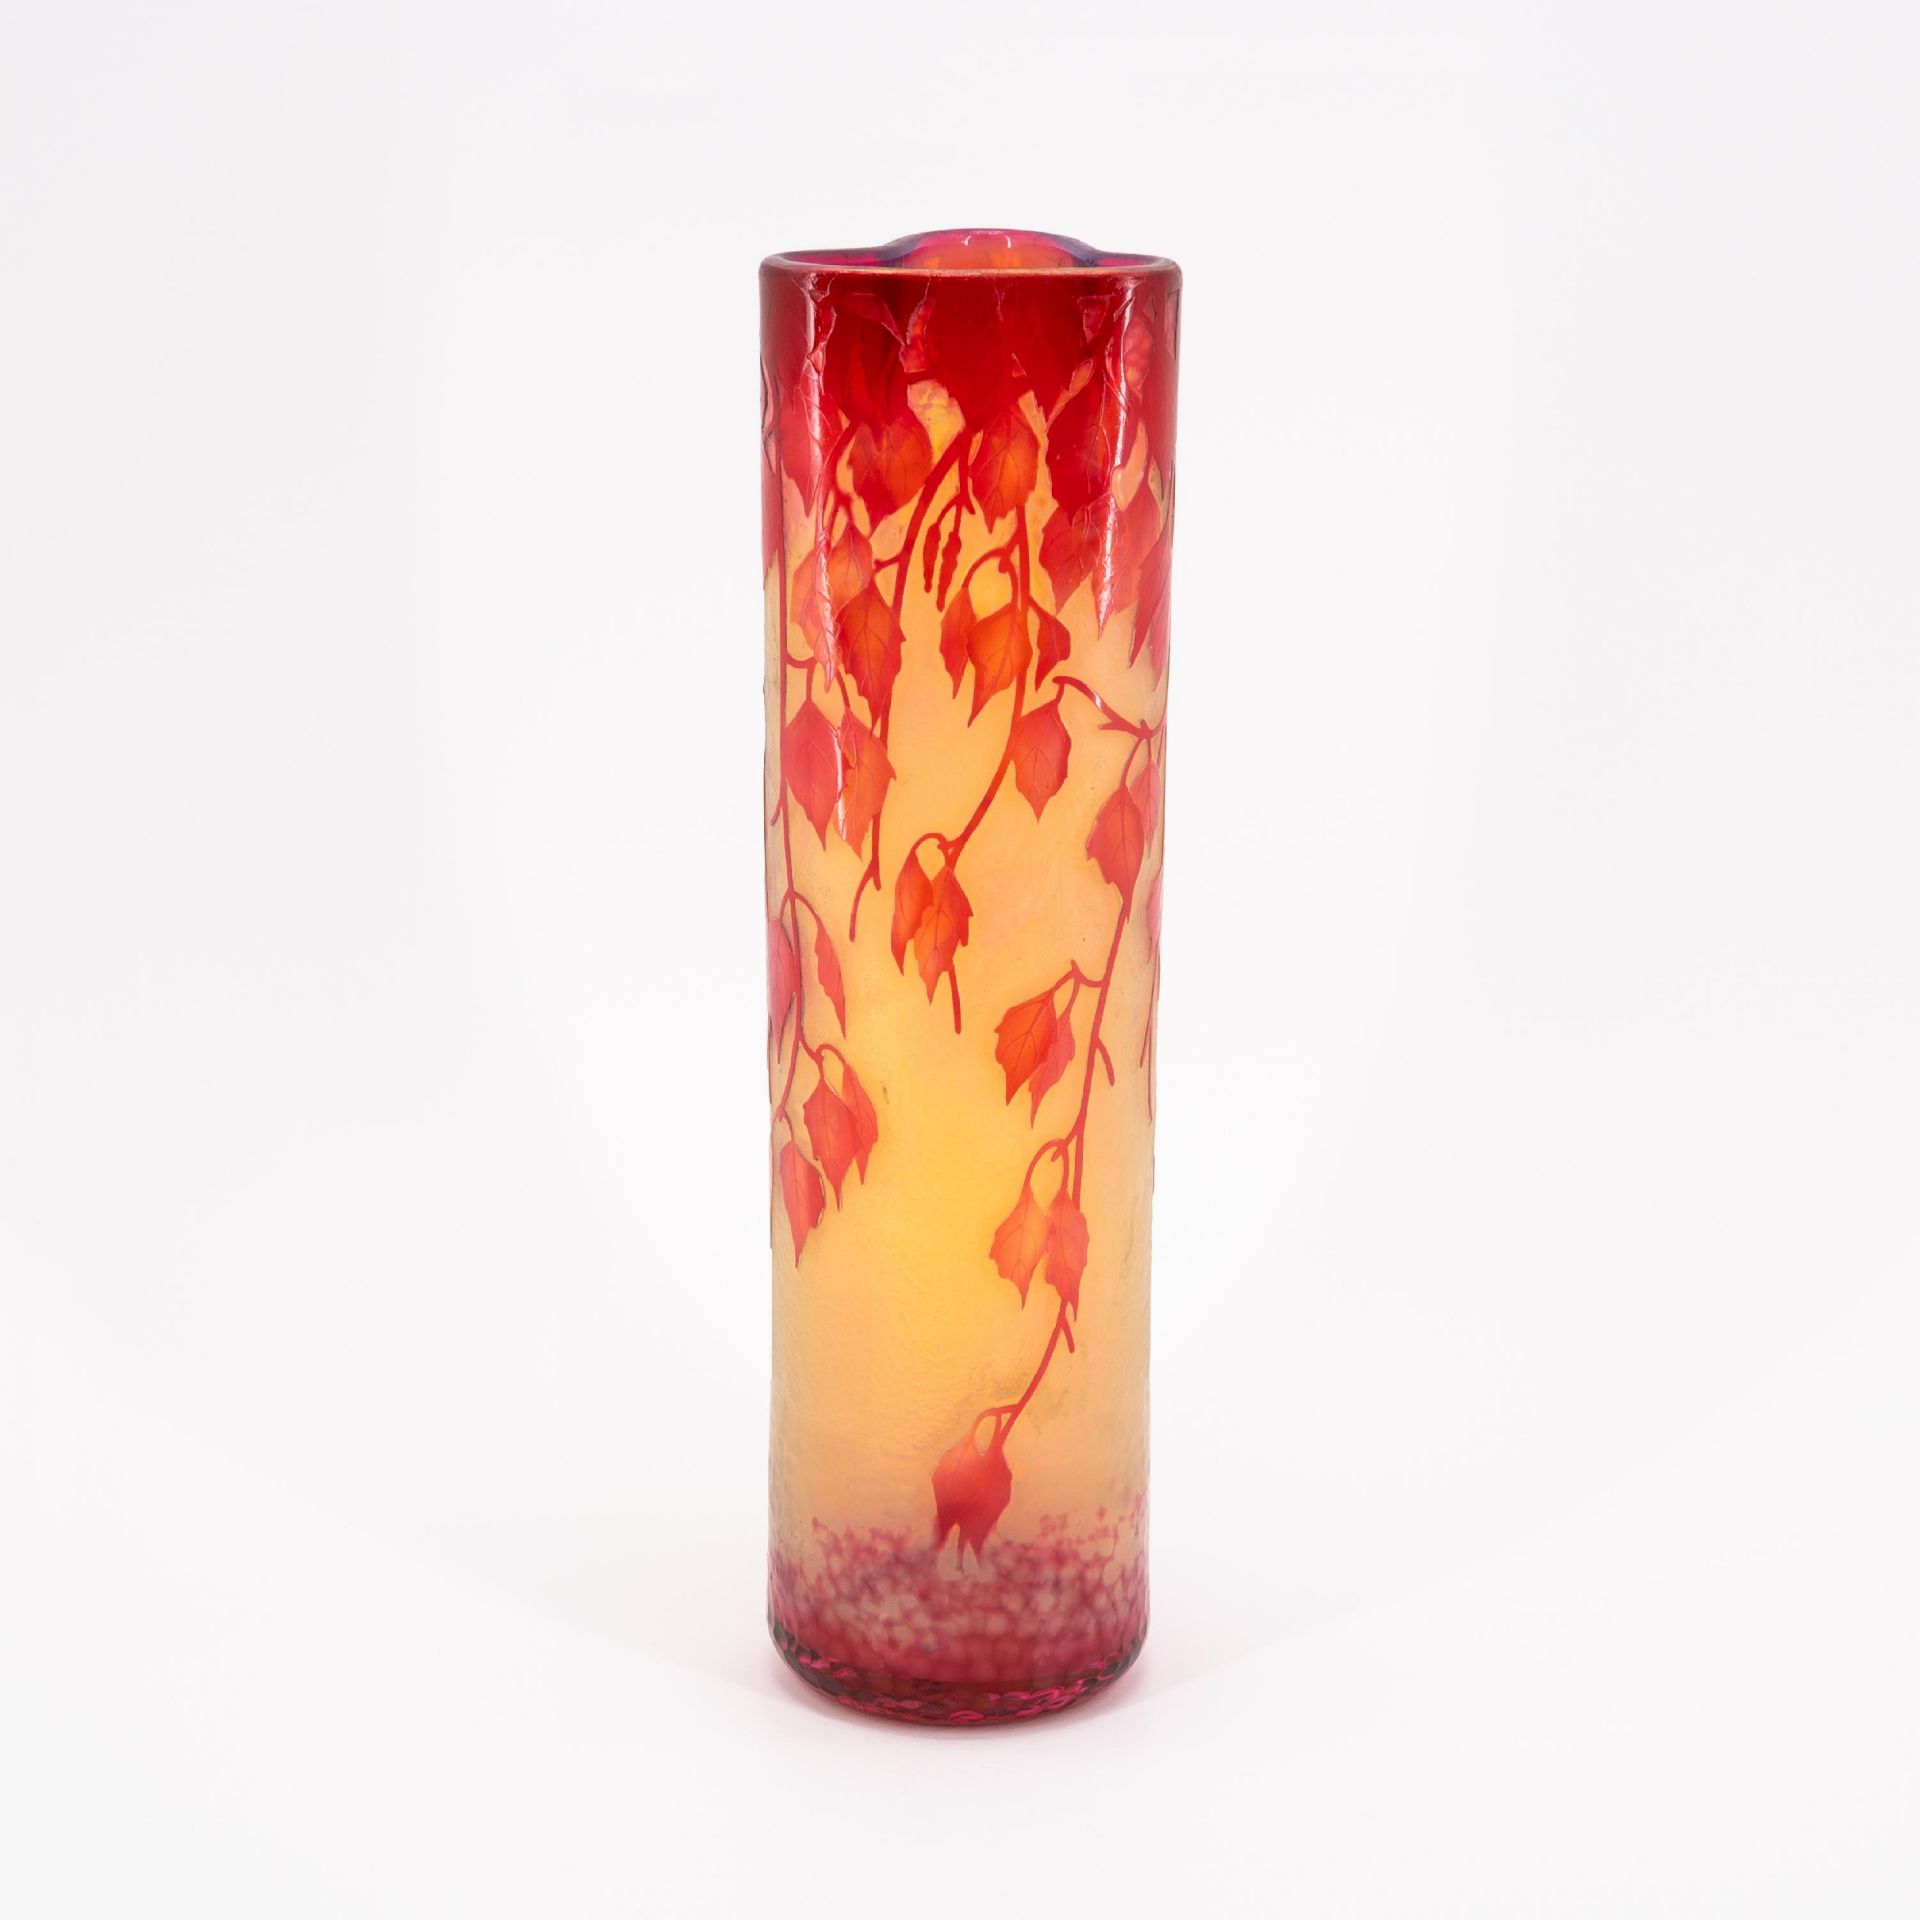 CYLINDER-SHAPED GLASS VASE WITH BIRCH LEAVES - Image 3 of 6